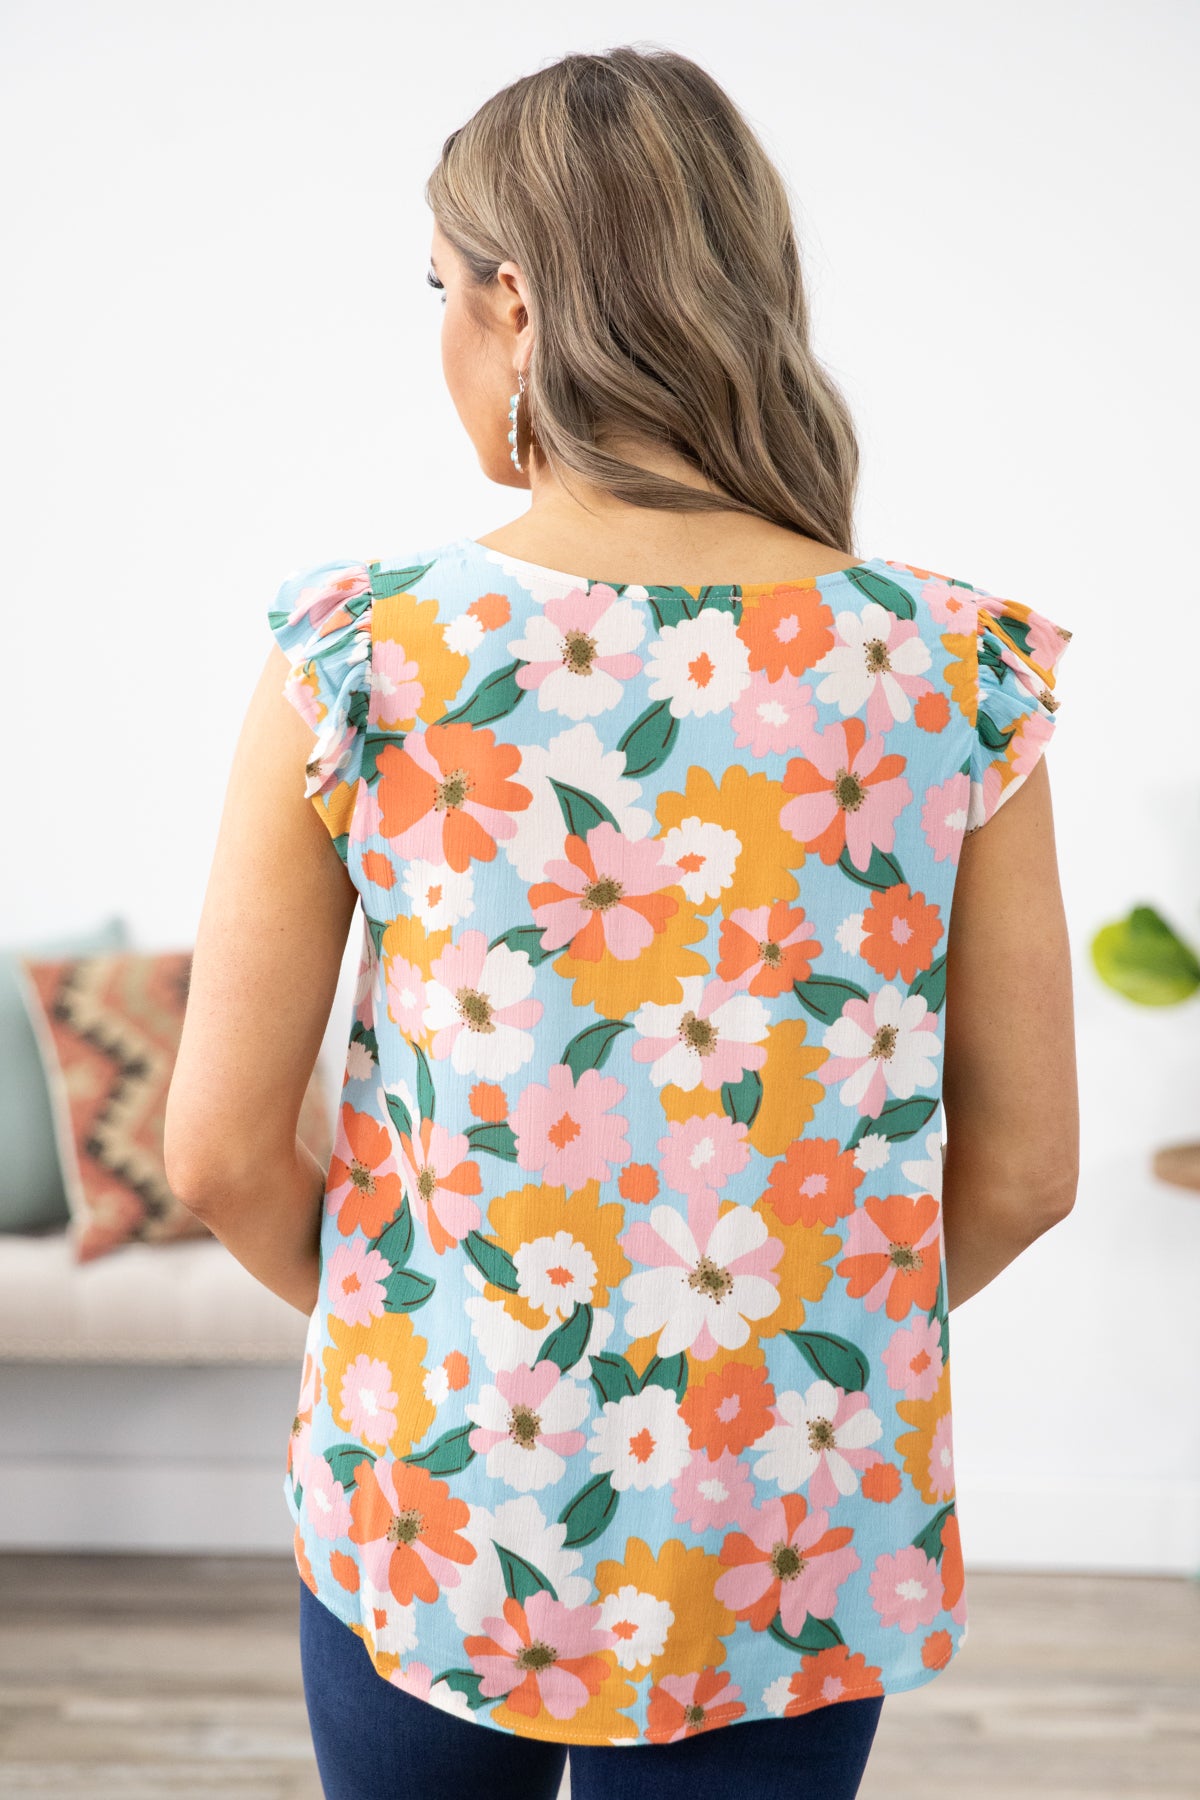 Aqua and Orange Floral Print Ruffle Sleeve Top - Filly Flair